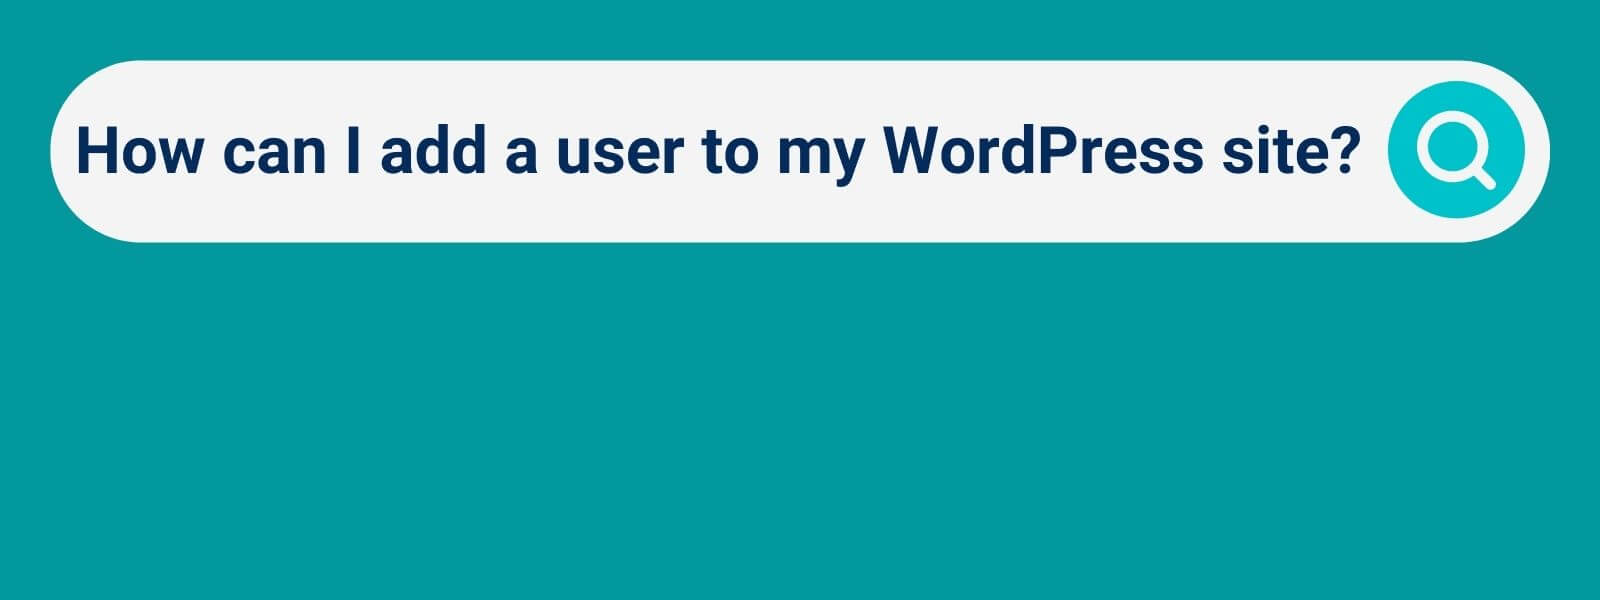 Search box with text "How to safely give someone access to WordPress"